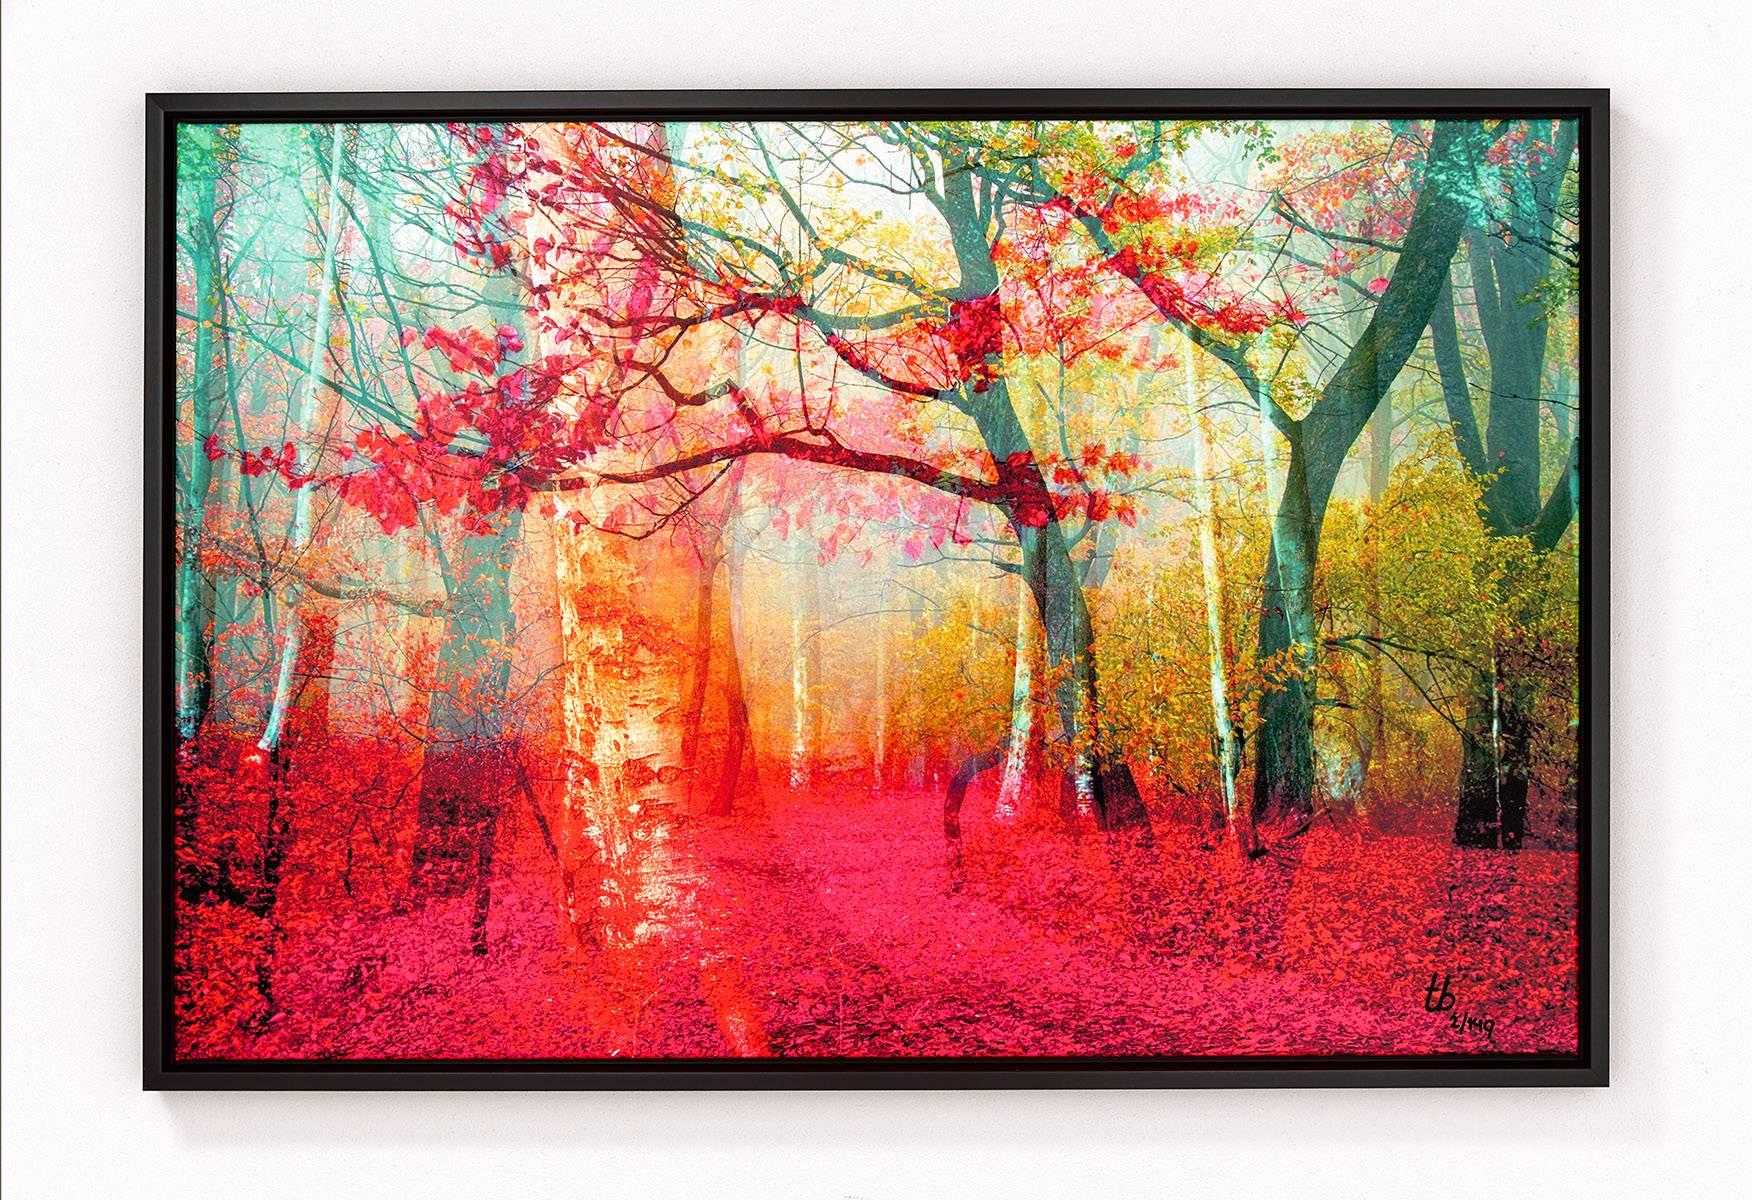 Pink Forest - Framed Fine Art Limited Edition of 149 - Photograph by Thomas Bijen